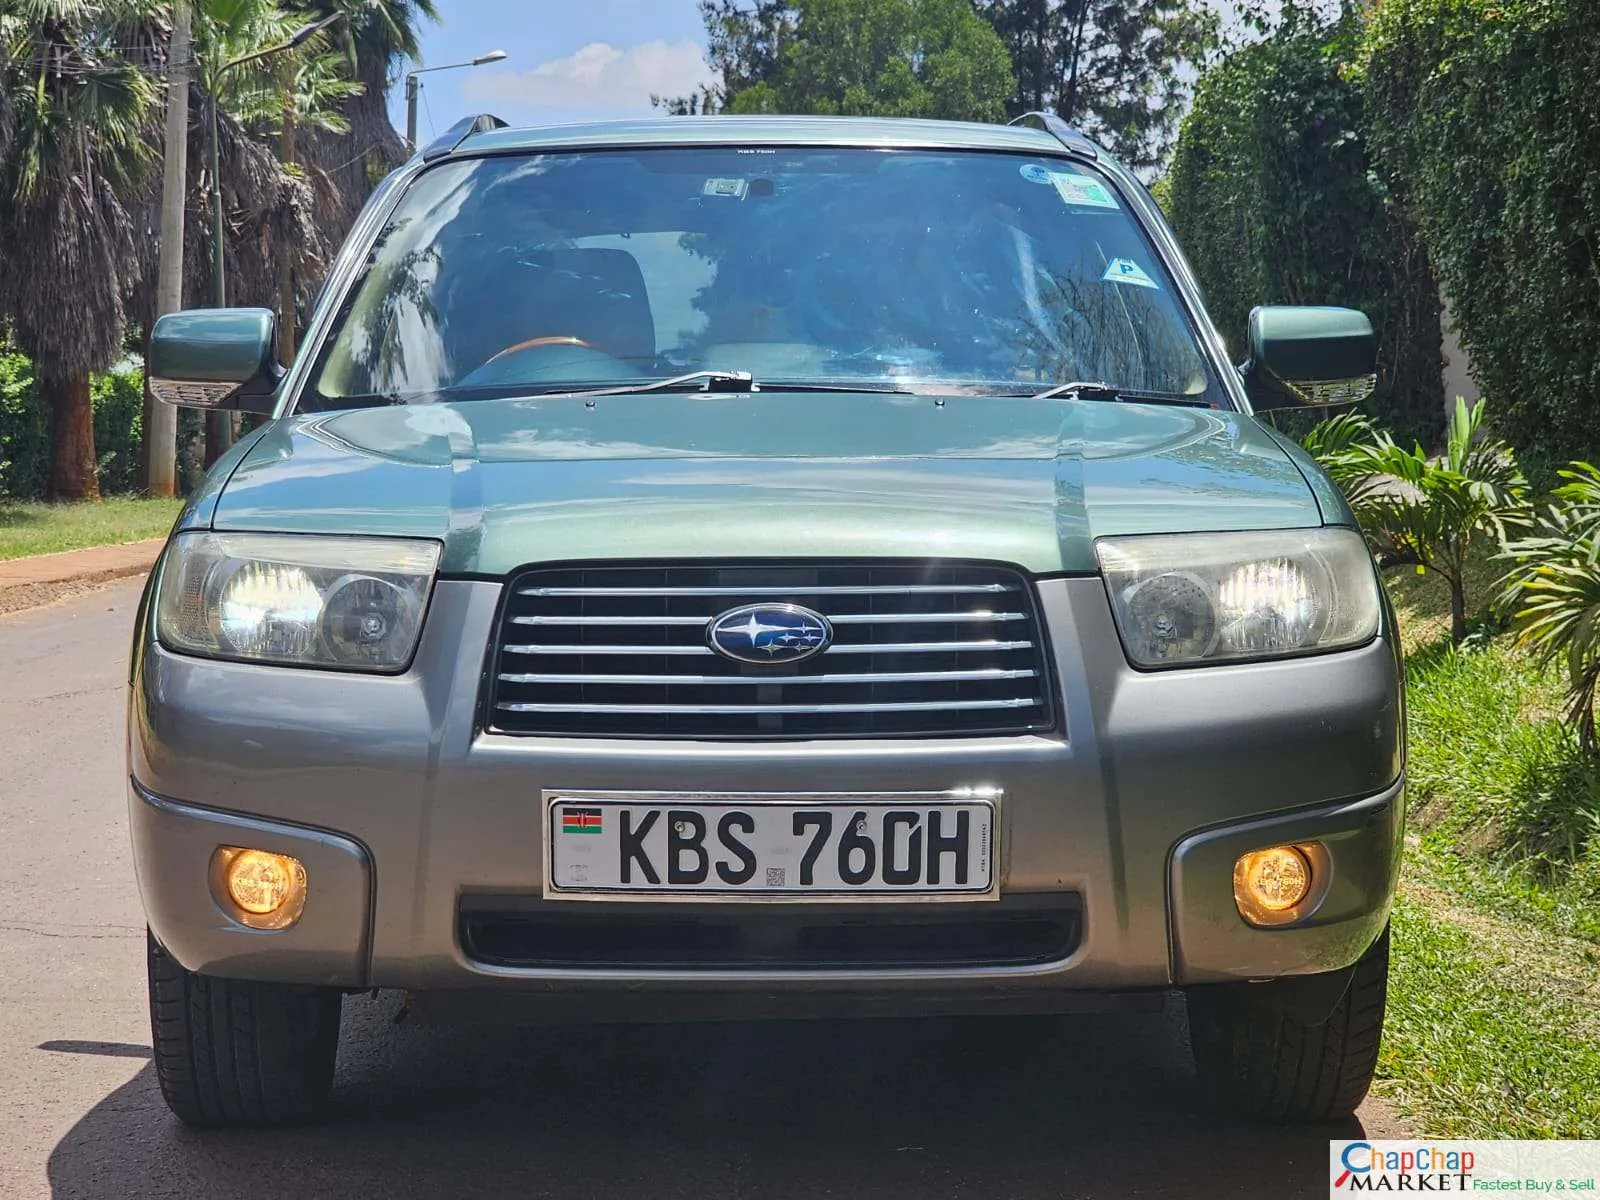 Subaru Forester for sale in Kenya You Pay 30% deposit Trade in Ok EXCLUSIVE hire purchase installments non turbo sg5